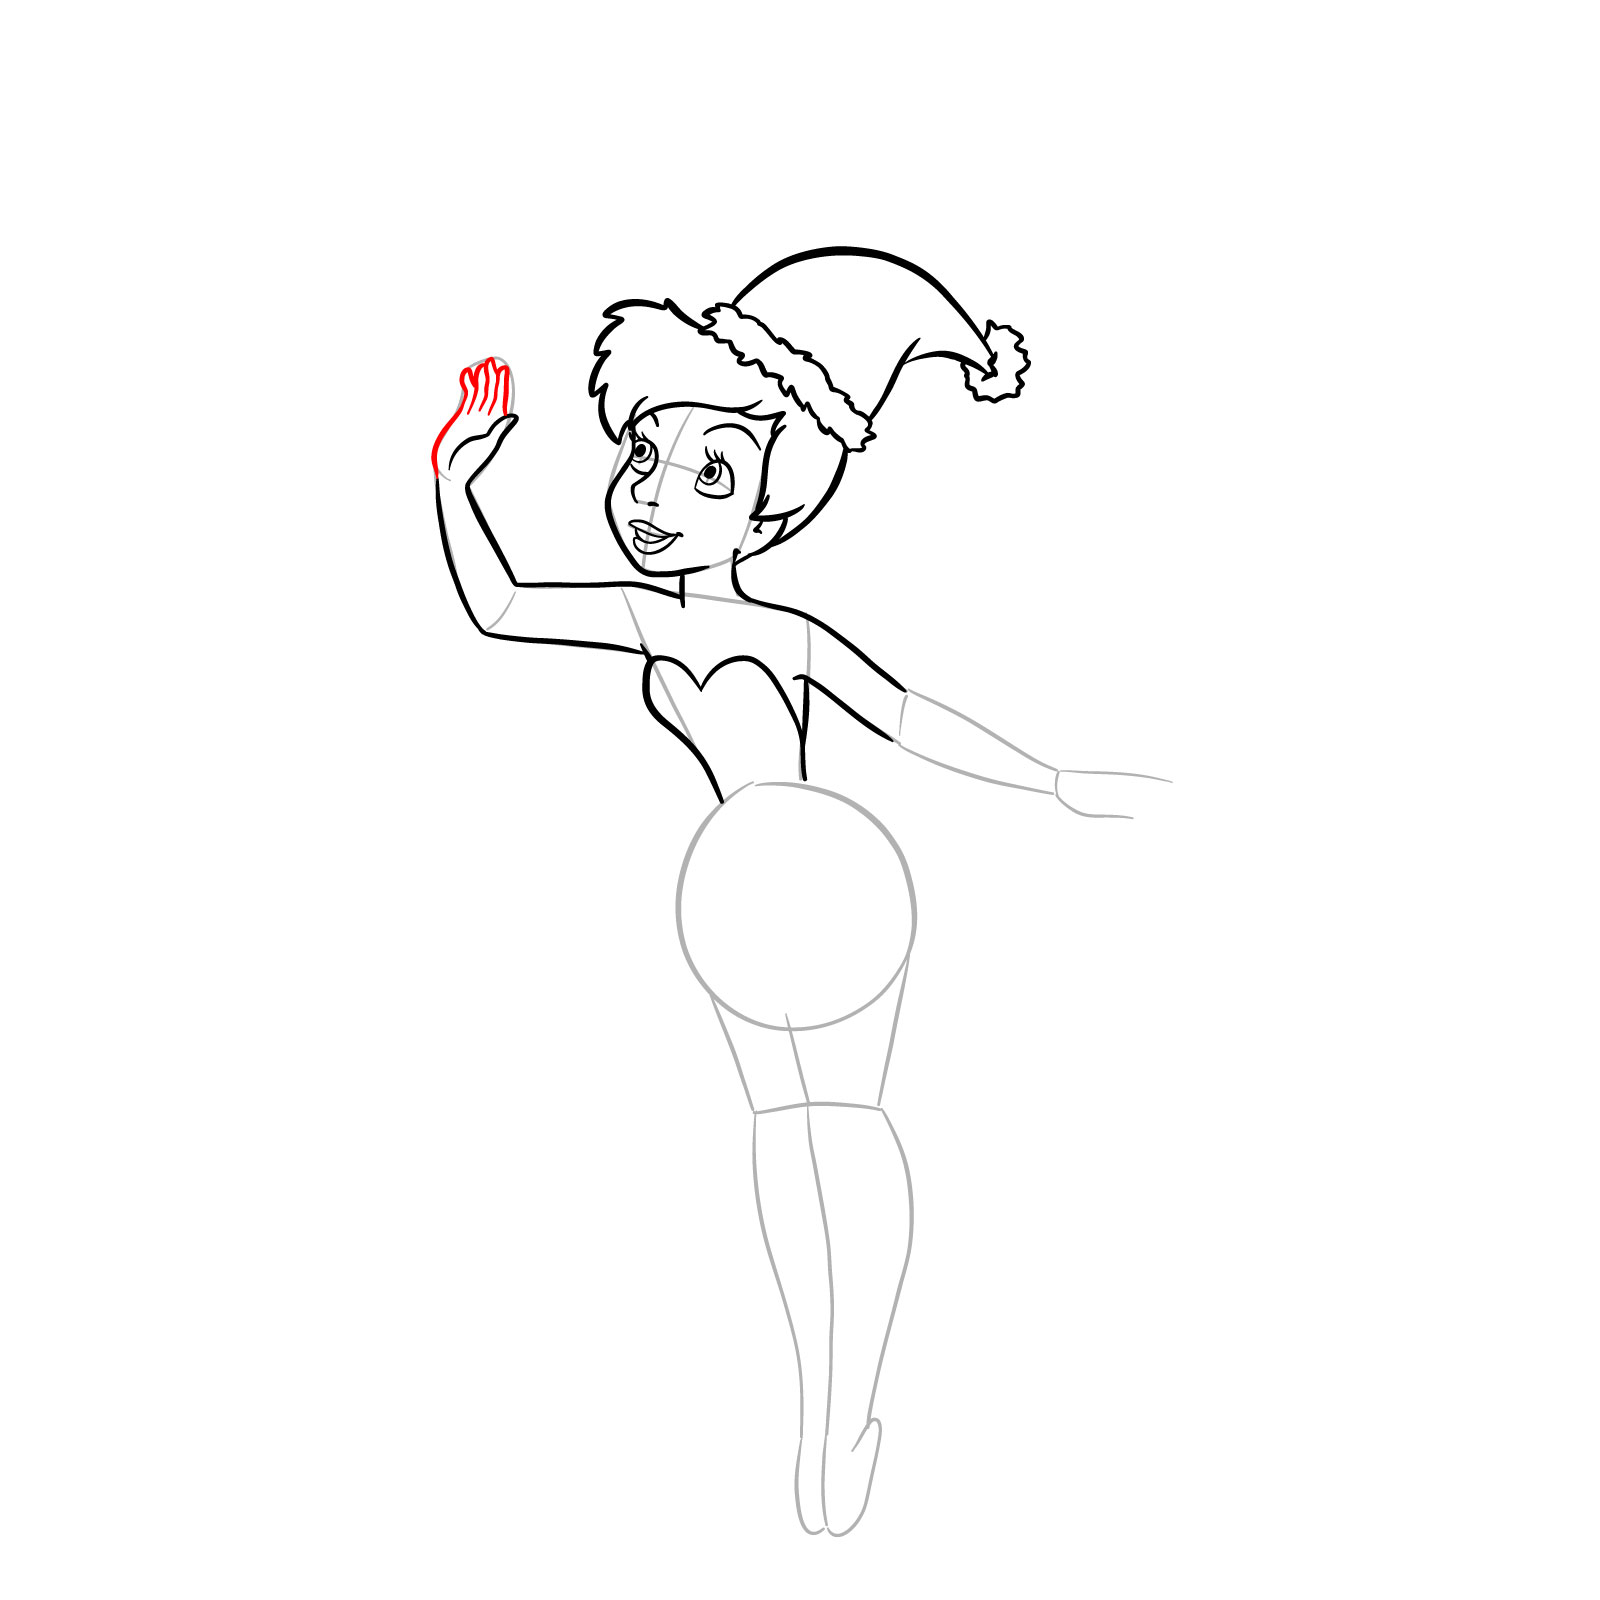 How to draw Tinker Bell in a Christmas costume - step 17